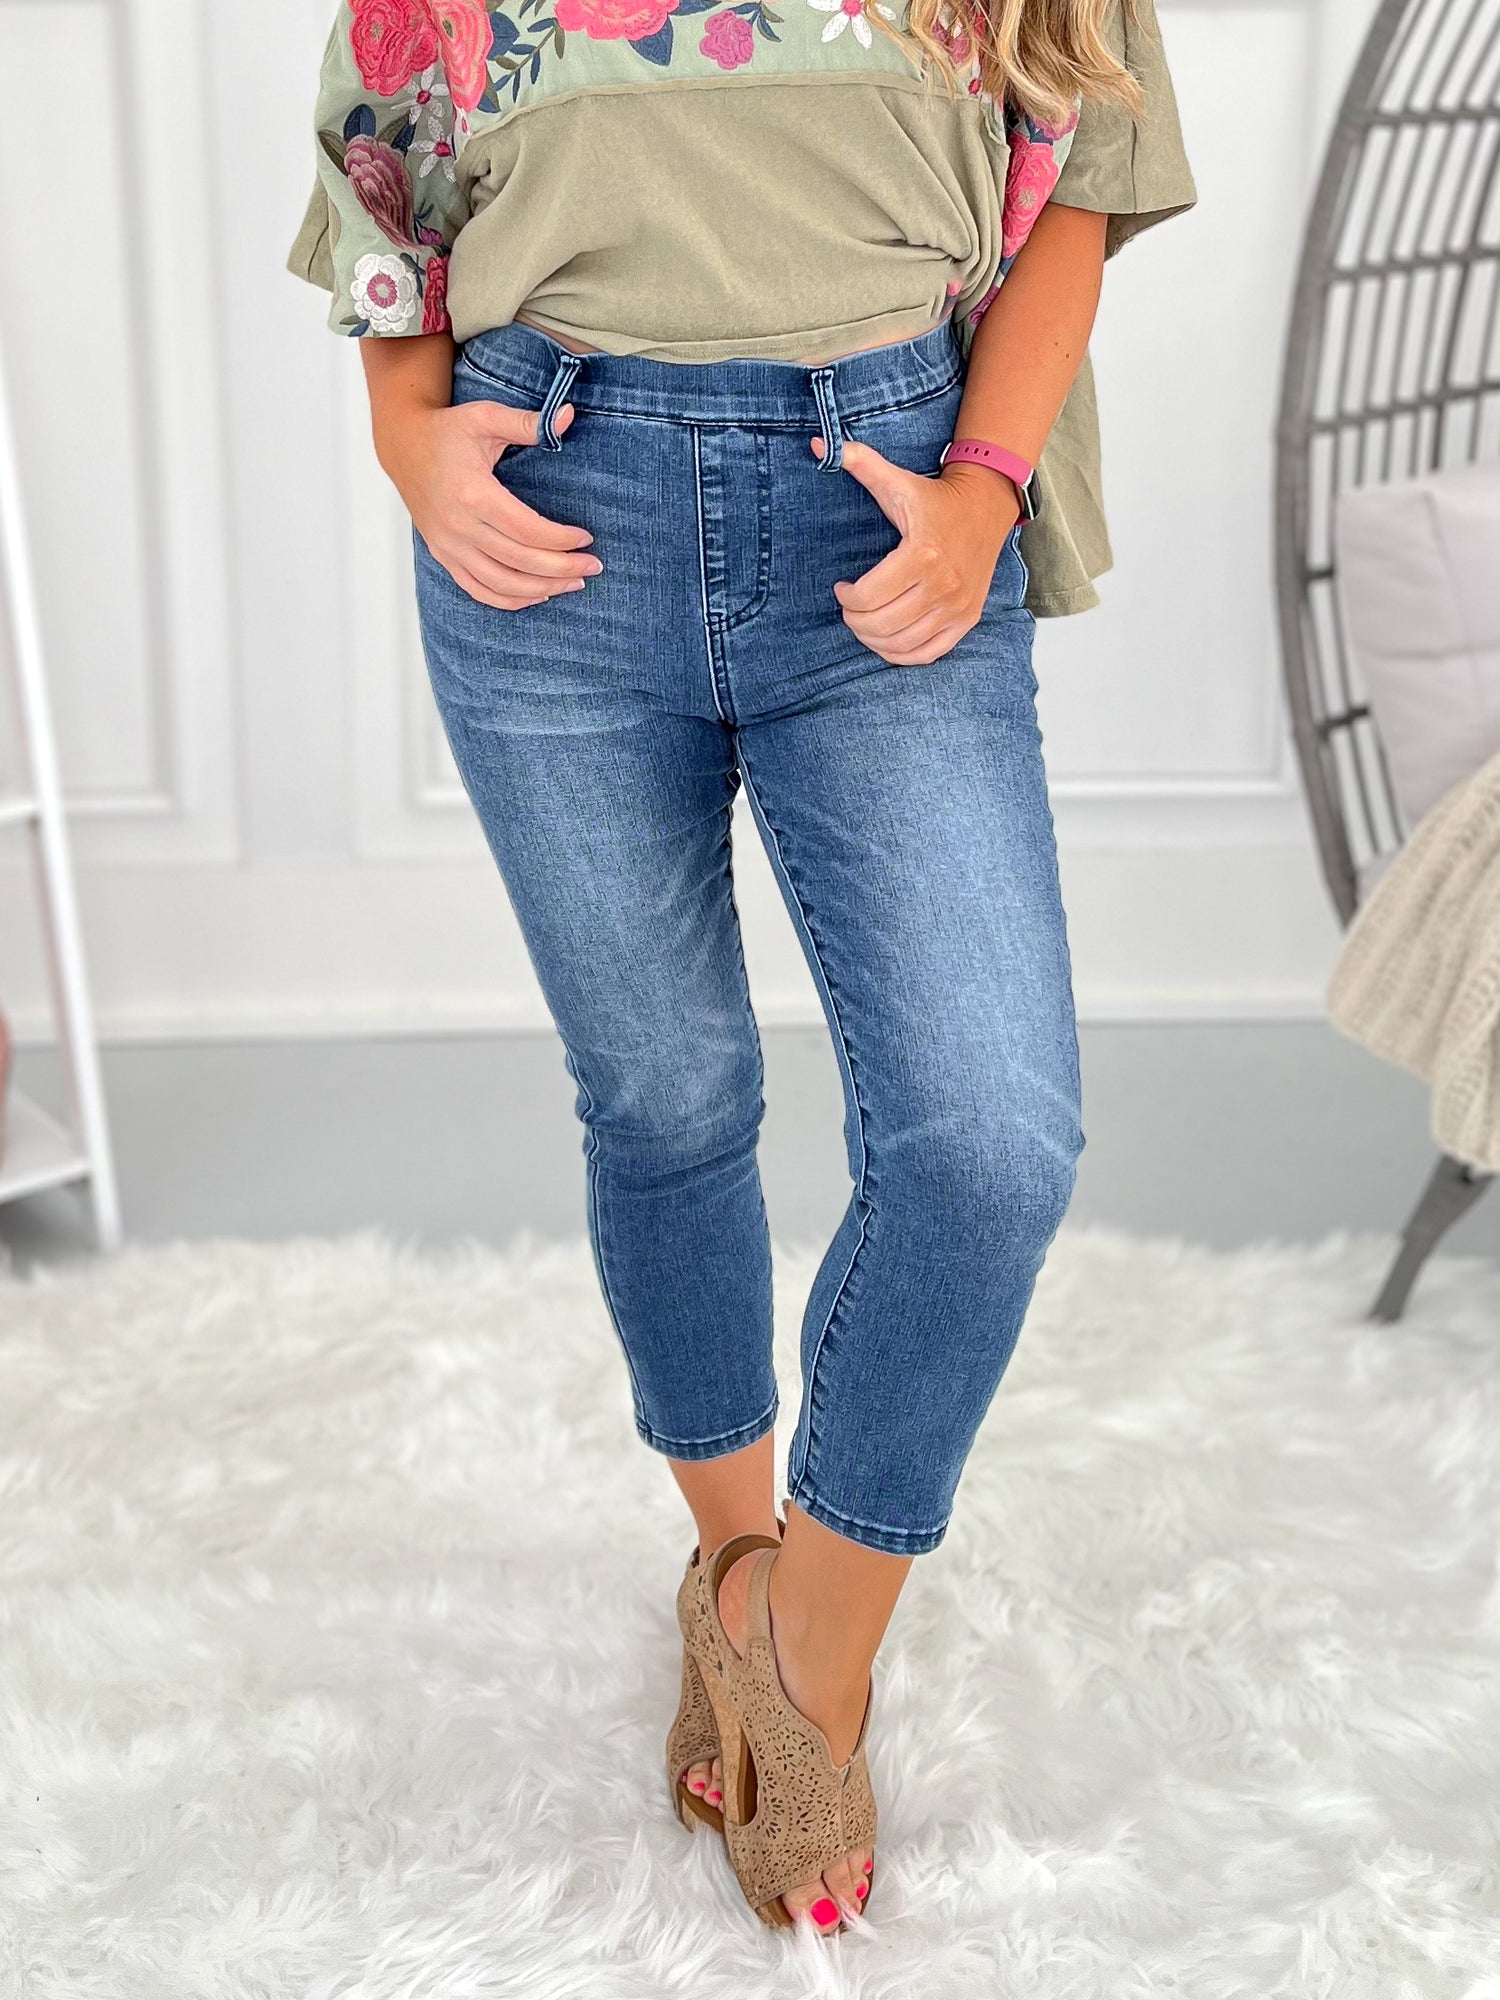 Chill Out - Judy Blue Cool Denim Pull On Capris – Resort to Style